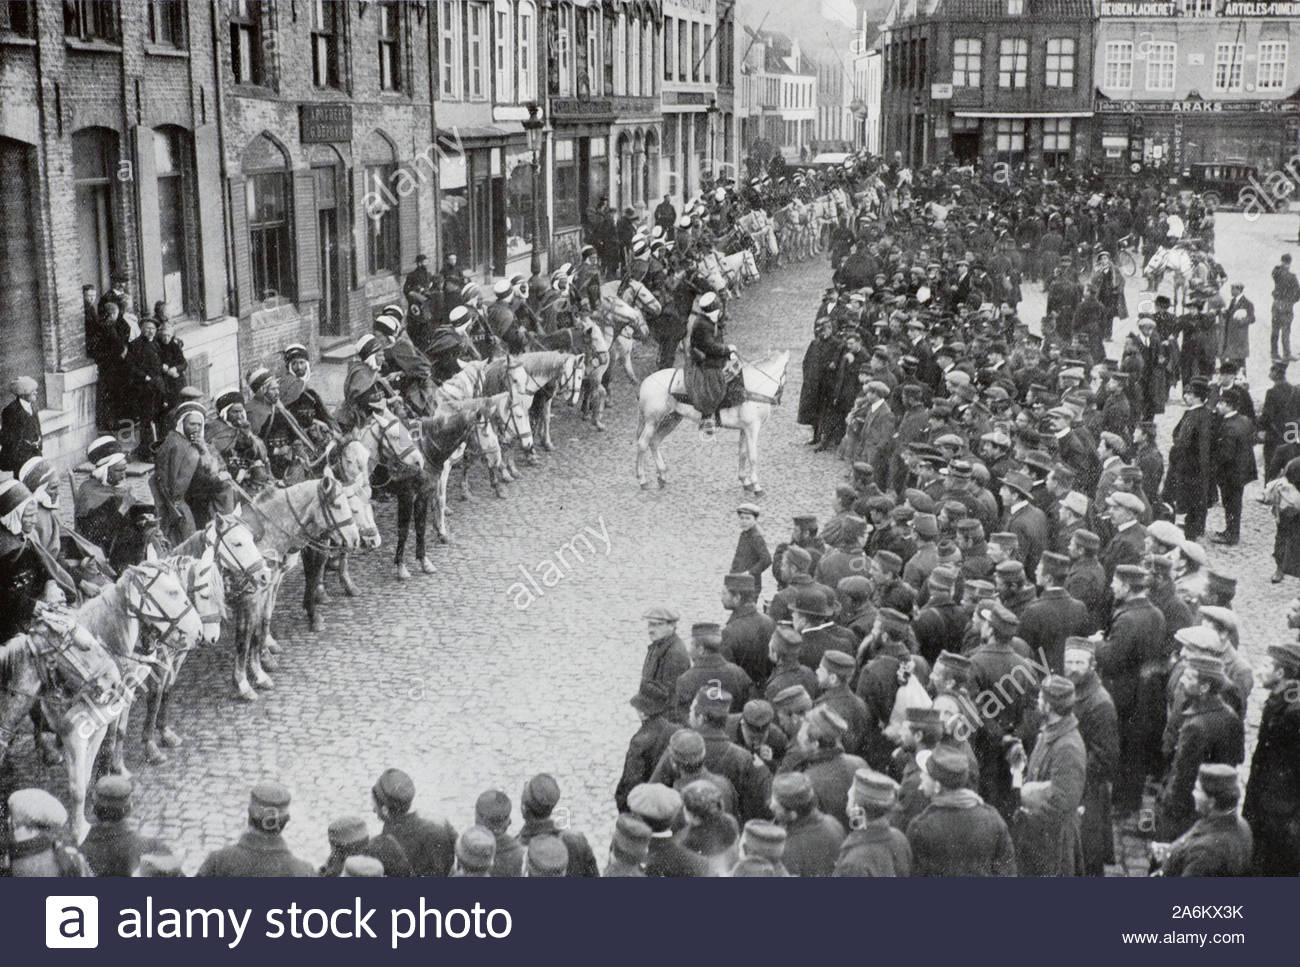 WW1 French Algerian Spahis Light cavalry in Furnes Market Square Belgium, vintage photograph from 1914 Stock Photo